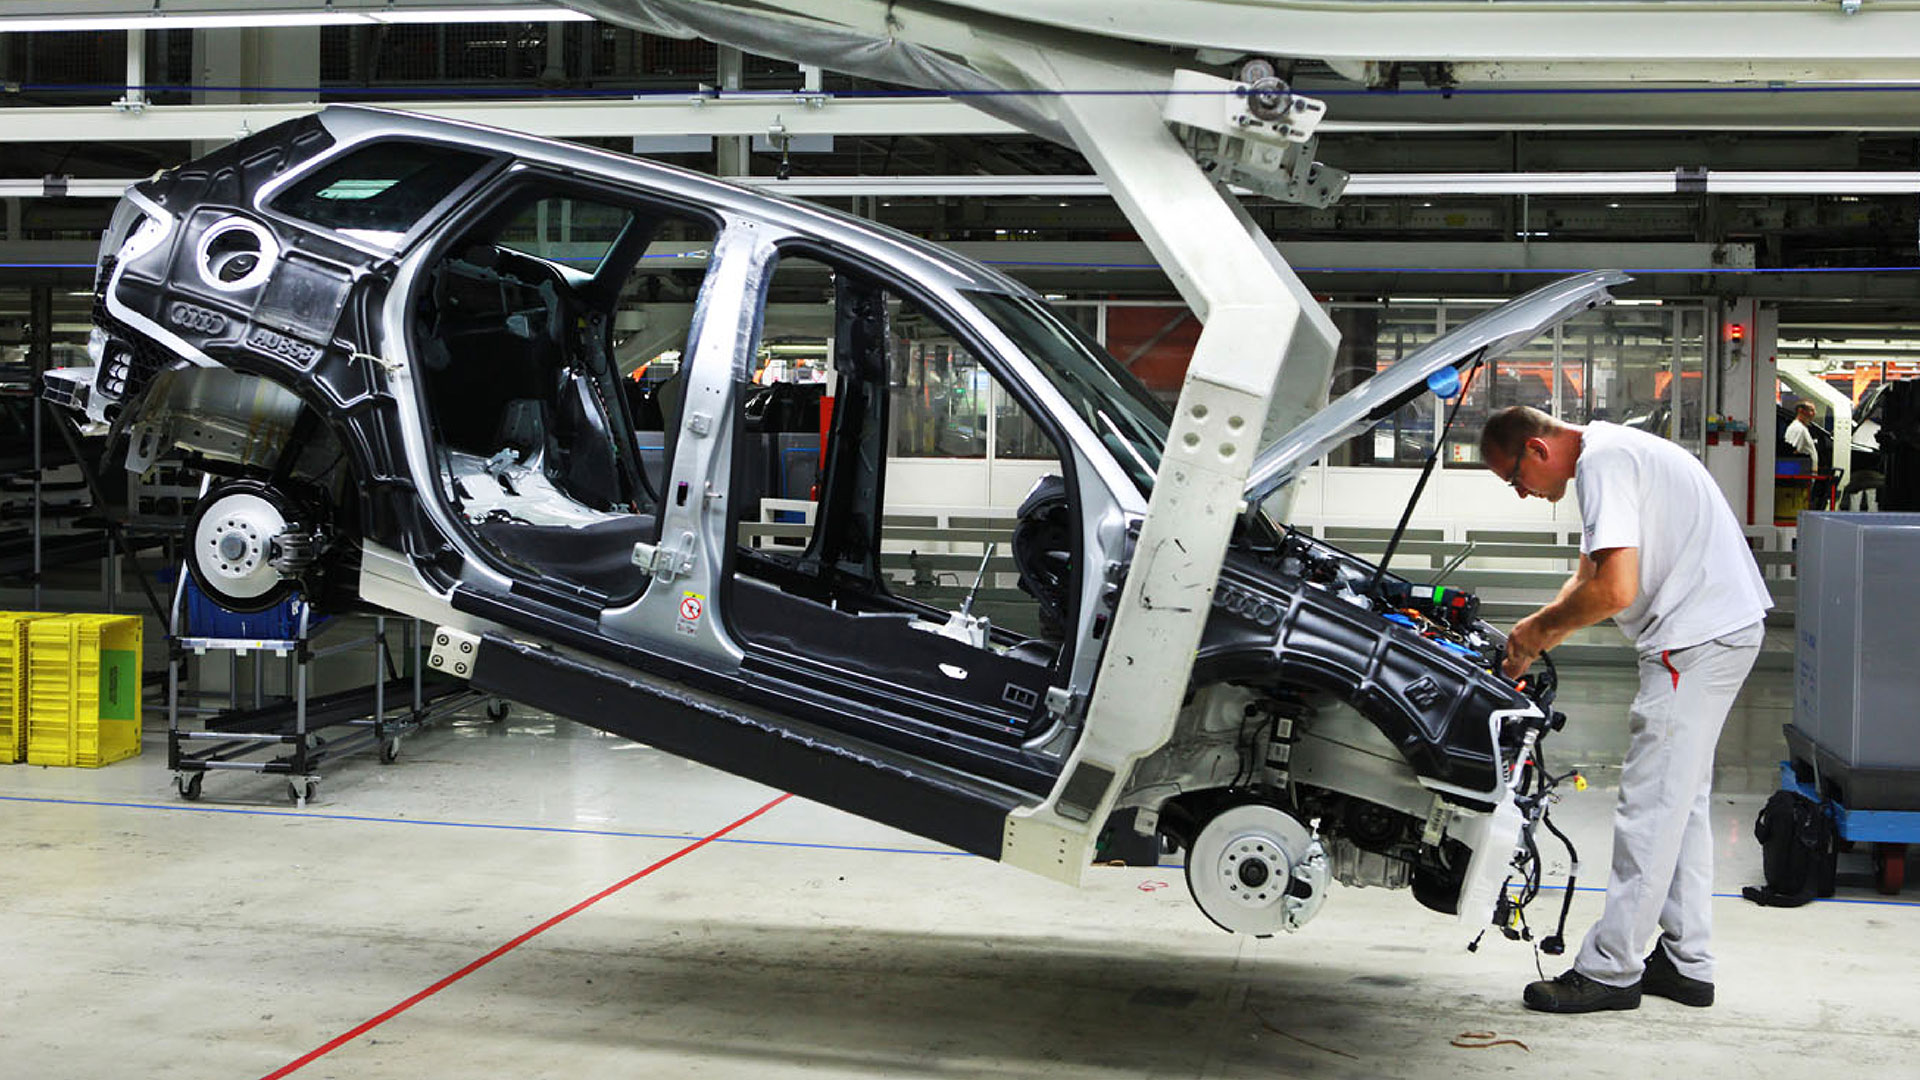 A worker assembling components under the car's hood with the help of a robot that holds the car and tilts it forward, making the worker's job easier